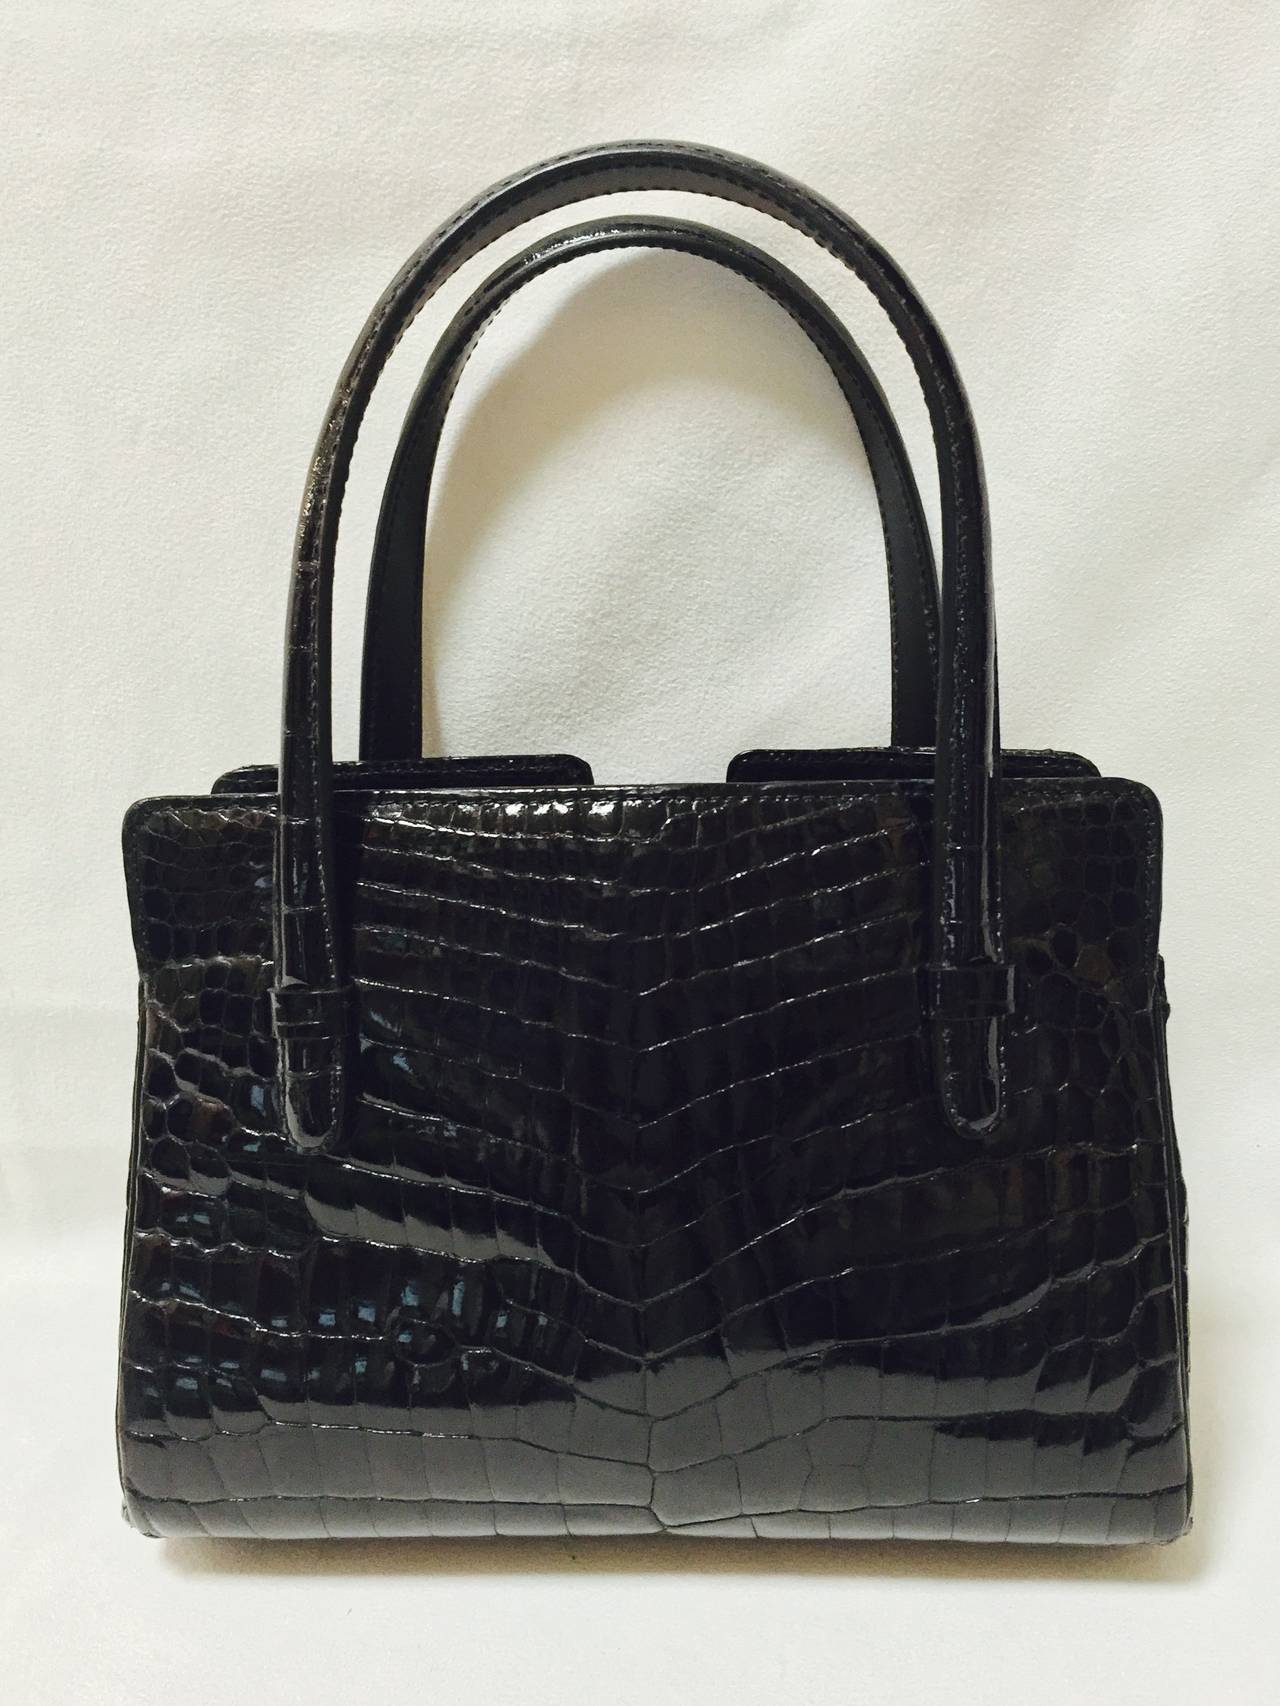 Luxurious 1950s Vintage Gucci Alligator Satchel With Crystals shows why this house has been on the forefront of fashion for almost a century!  Perfect for a lady, this handbag features three compartments.  The center compartment is framed and